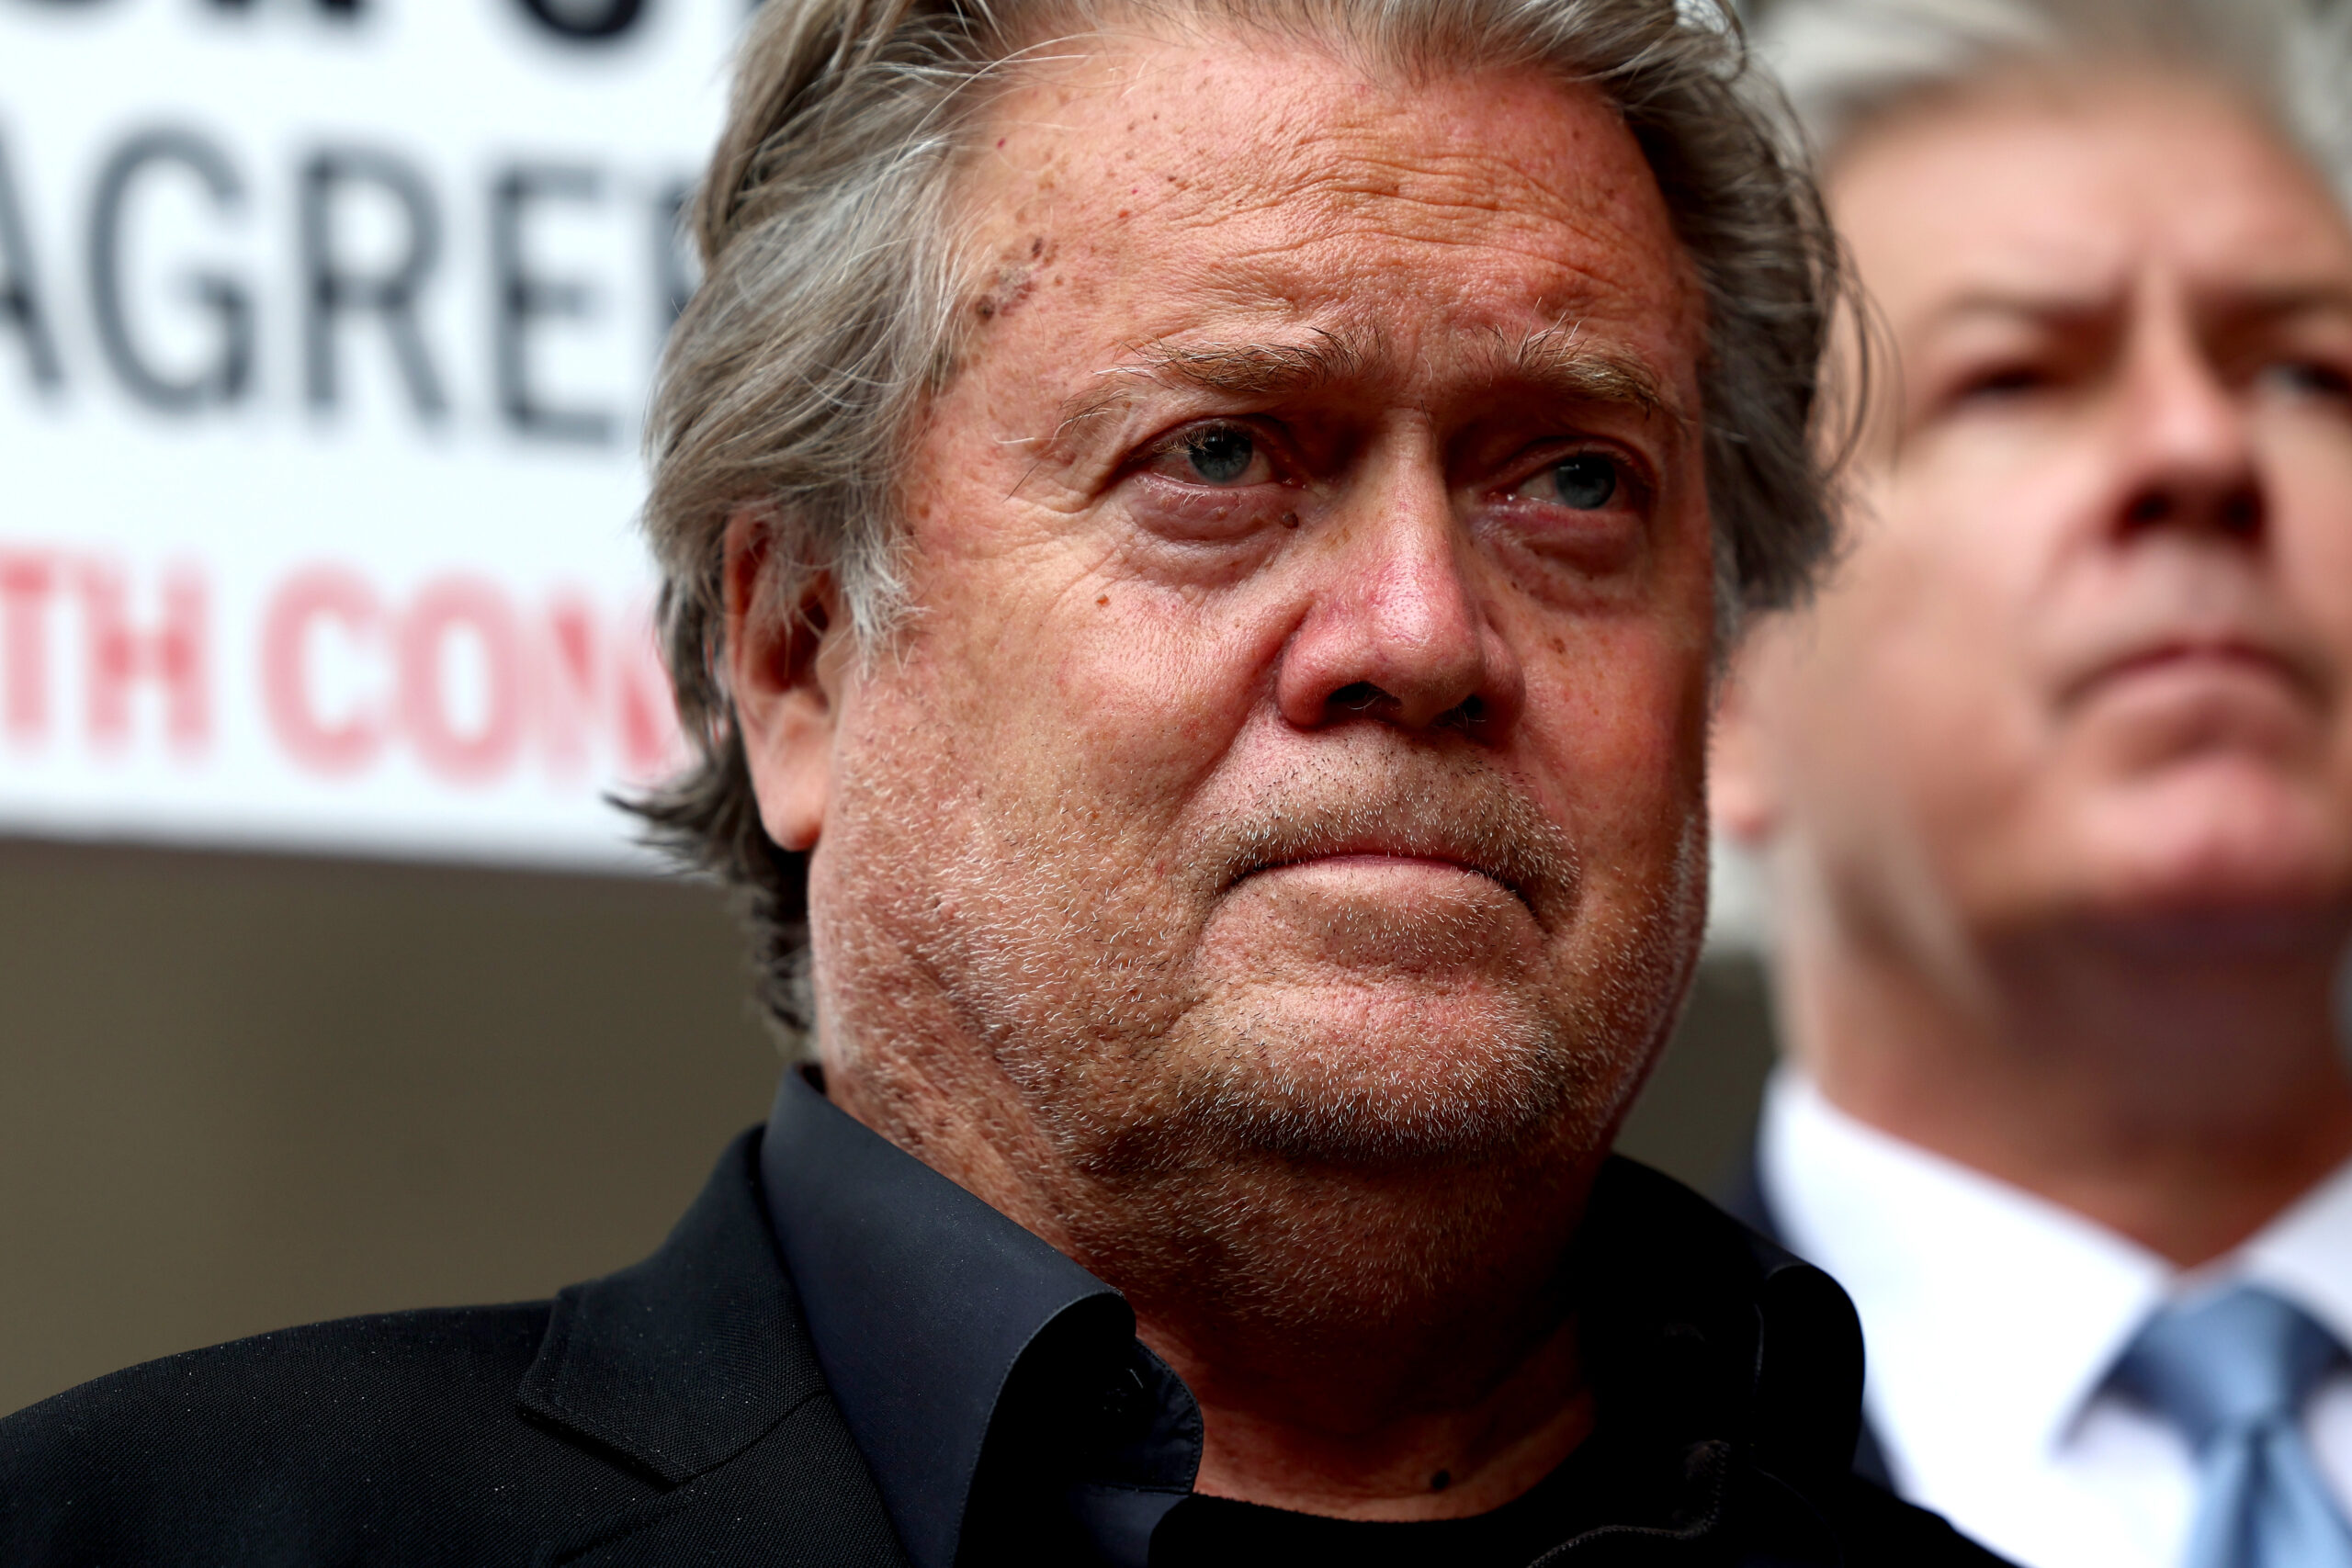 BREAKING: Steve Bannon Found Guilty For Contempt of Congress